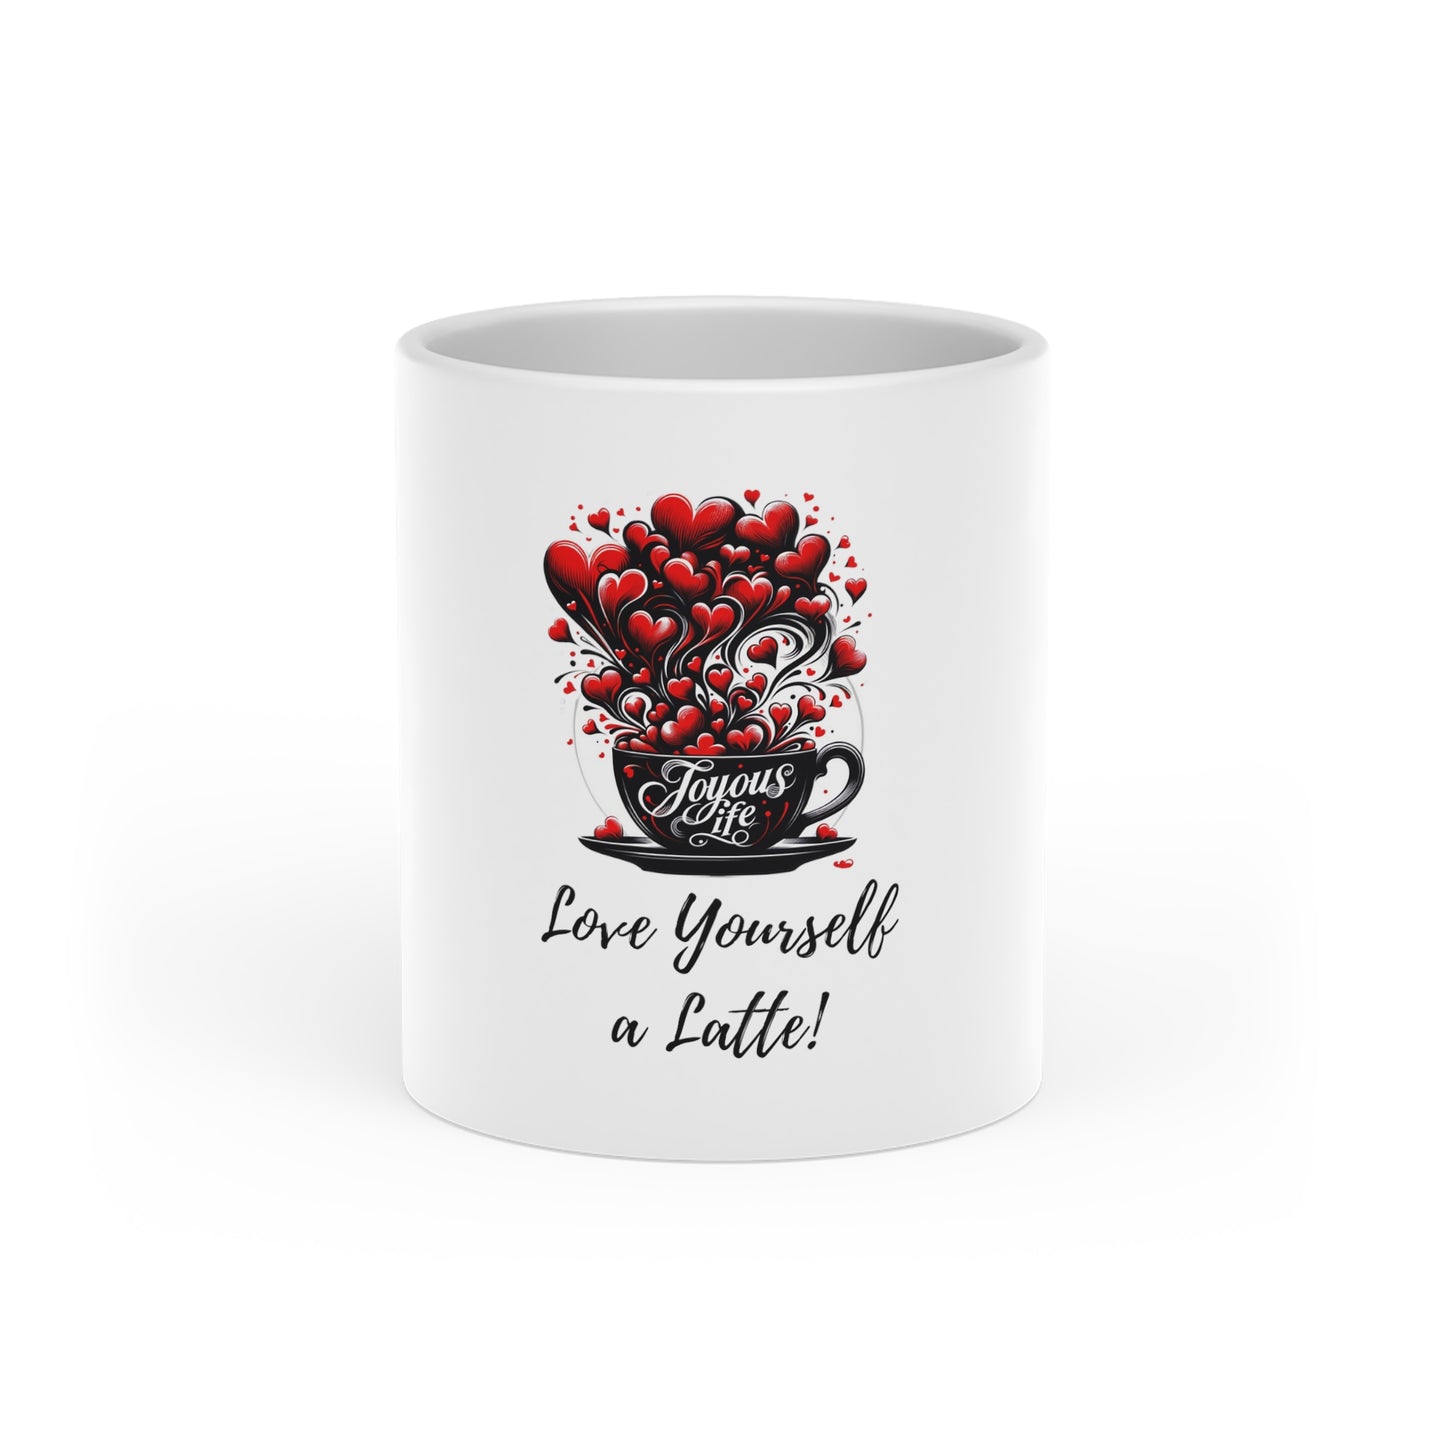 Love Yourself a Latte! Heart-Shaped Mug - Start Your Day with Self-Love, Joyous Life Journals